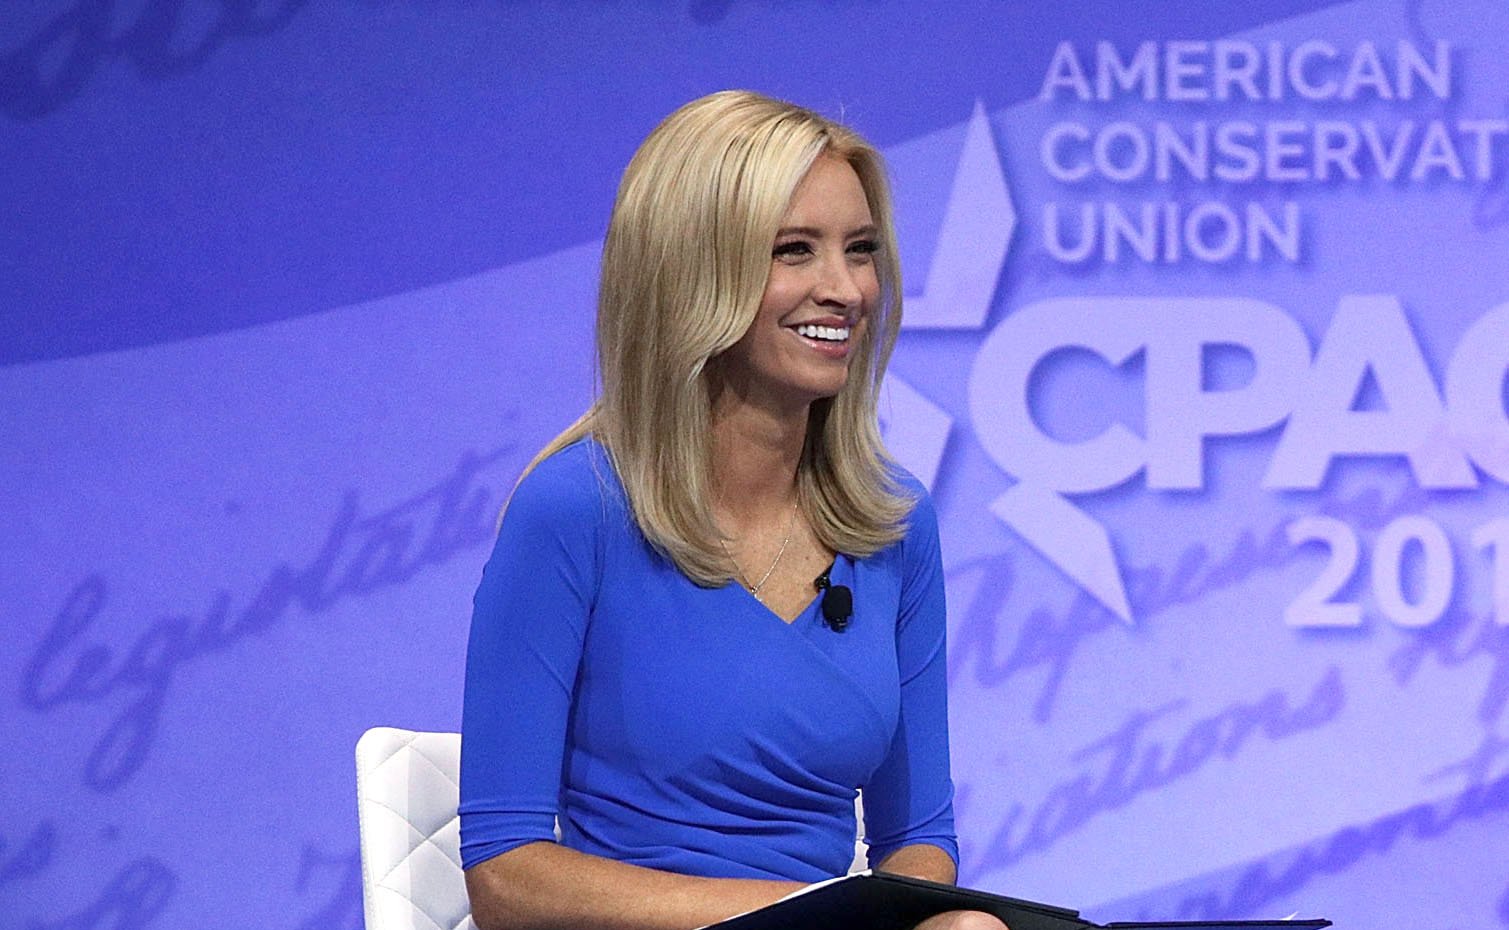 PHOTO: Political commentator Kayleigh McEnany during the Conservative Political Action Conference at the Gaylord National Resort and Convention Center, Feb. 23, 2017, in National Harbor, Md.  